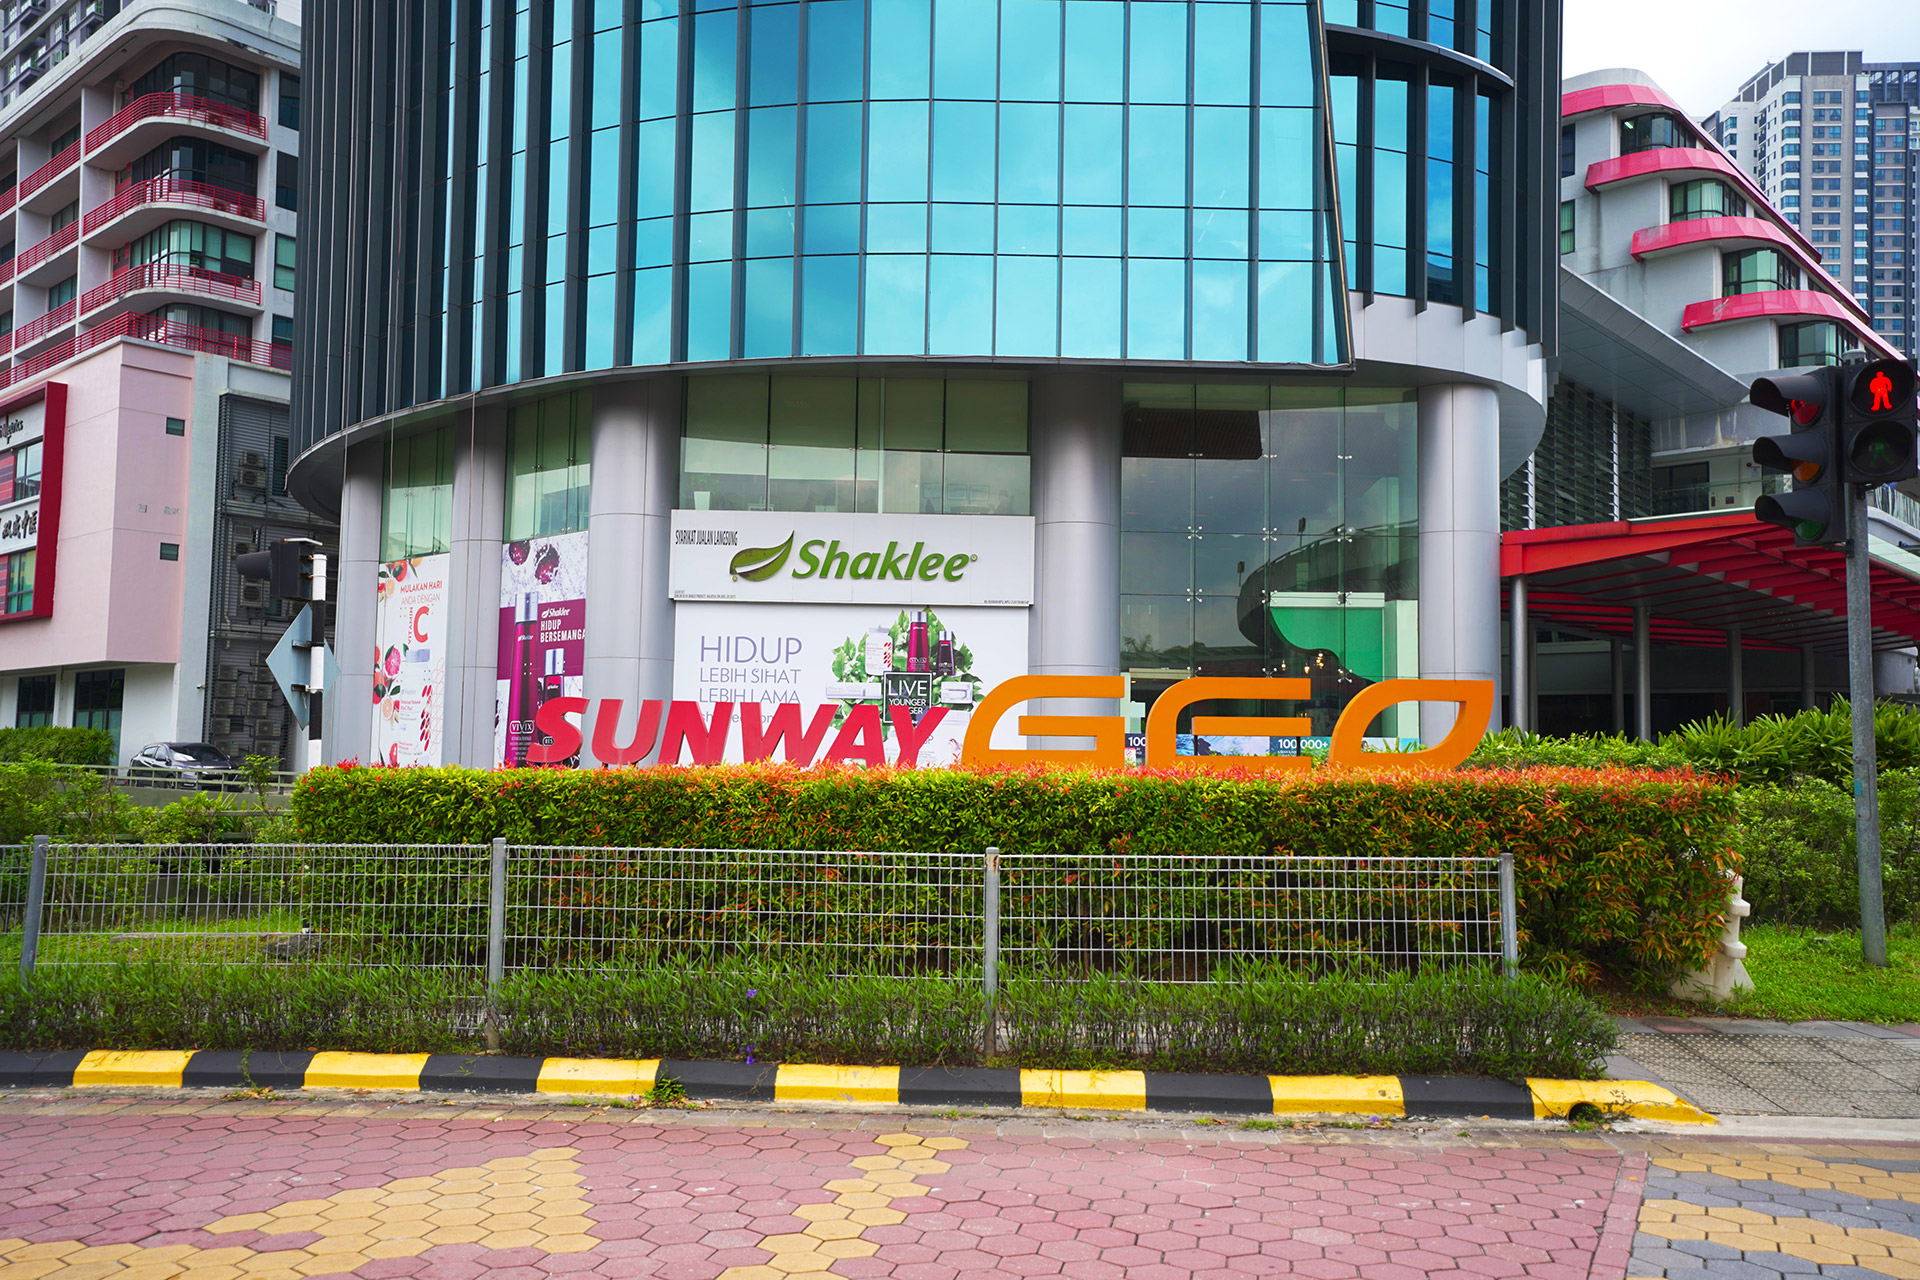 Home to some of the tastiest eateries, don’t look past Sunway Geo Avenue!